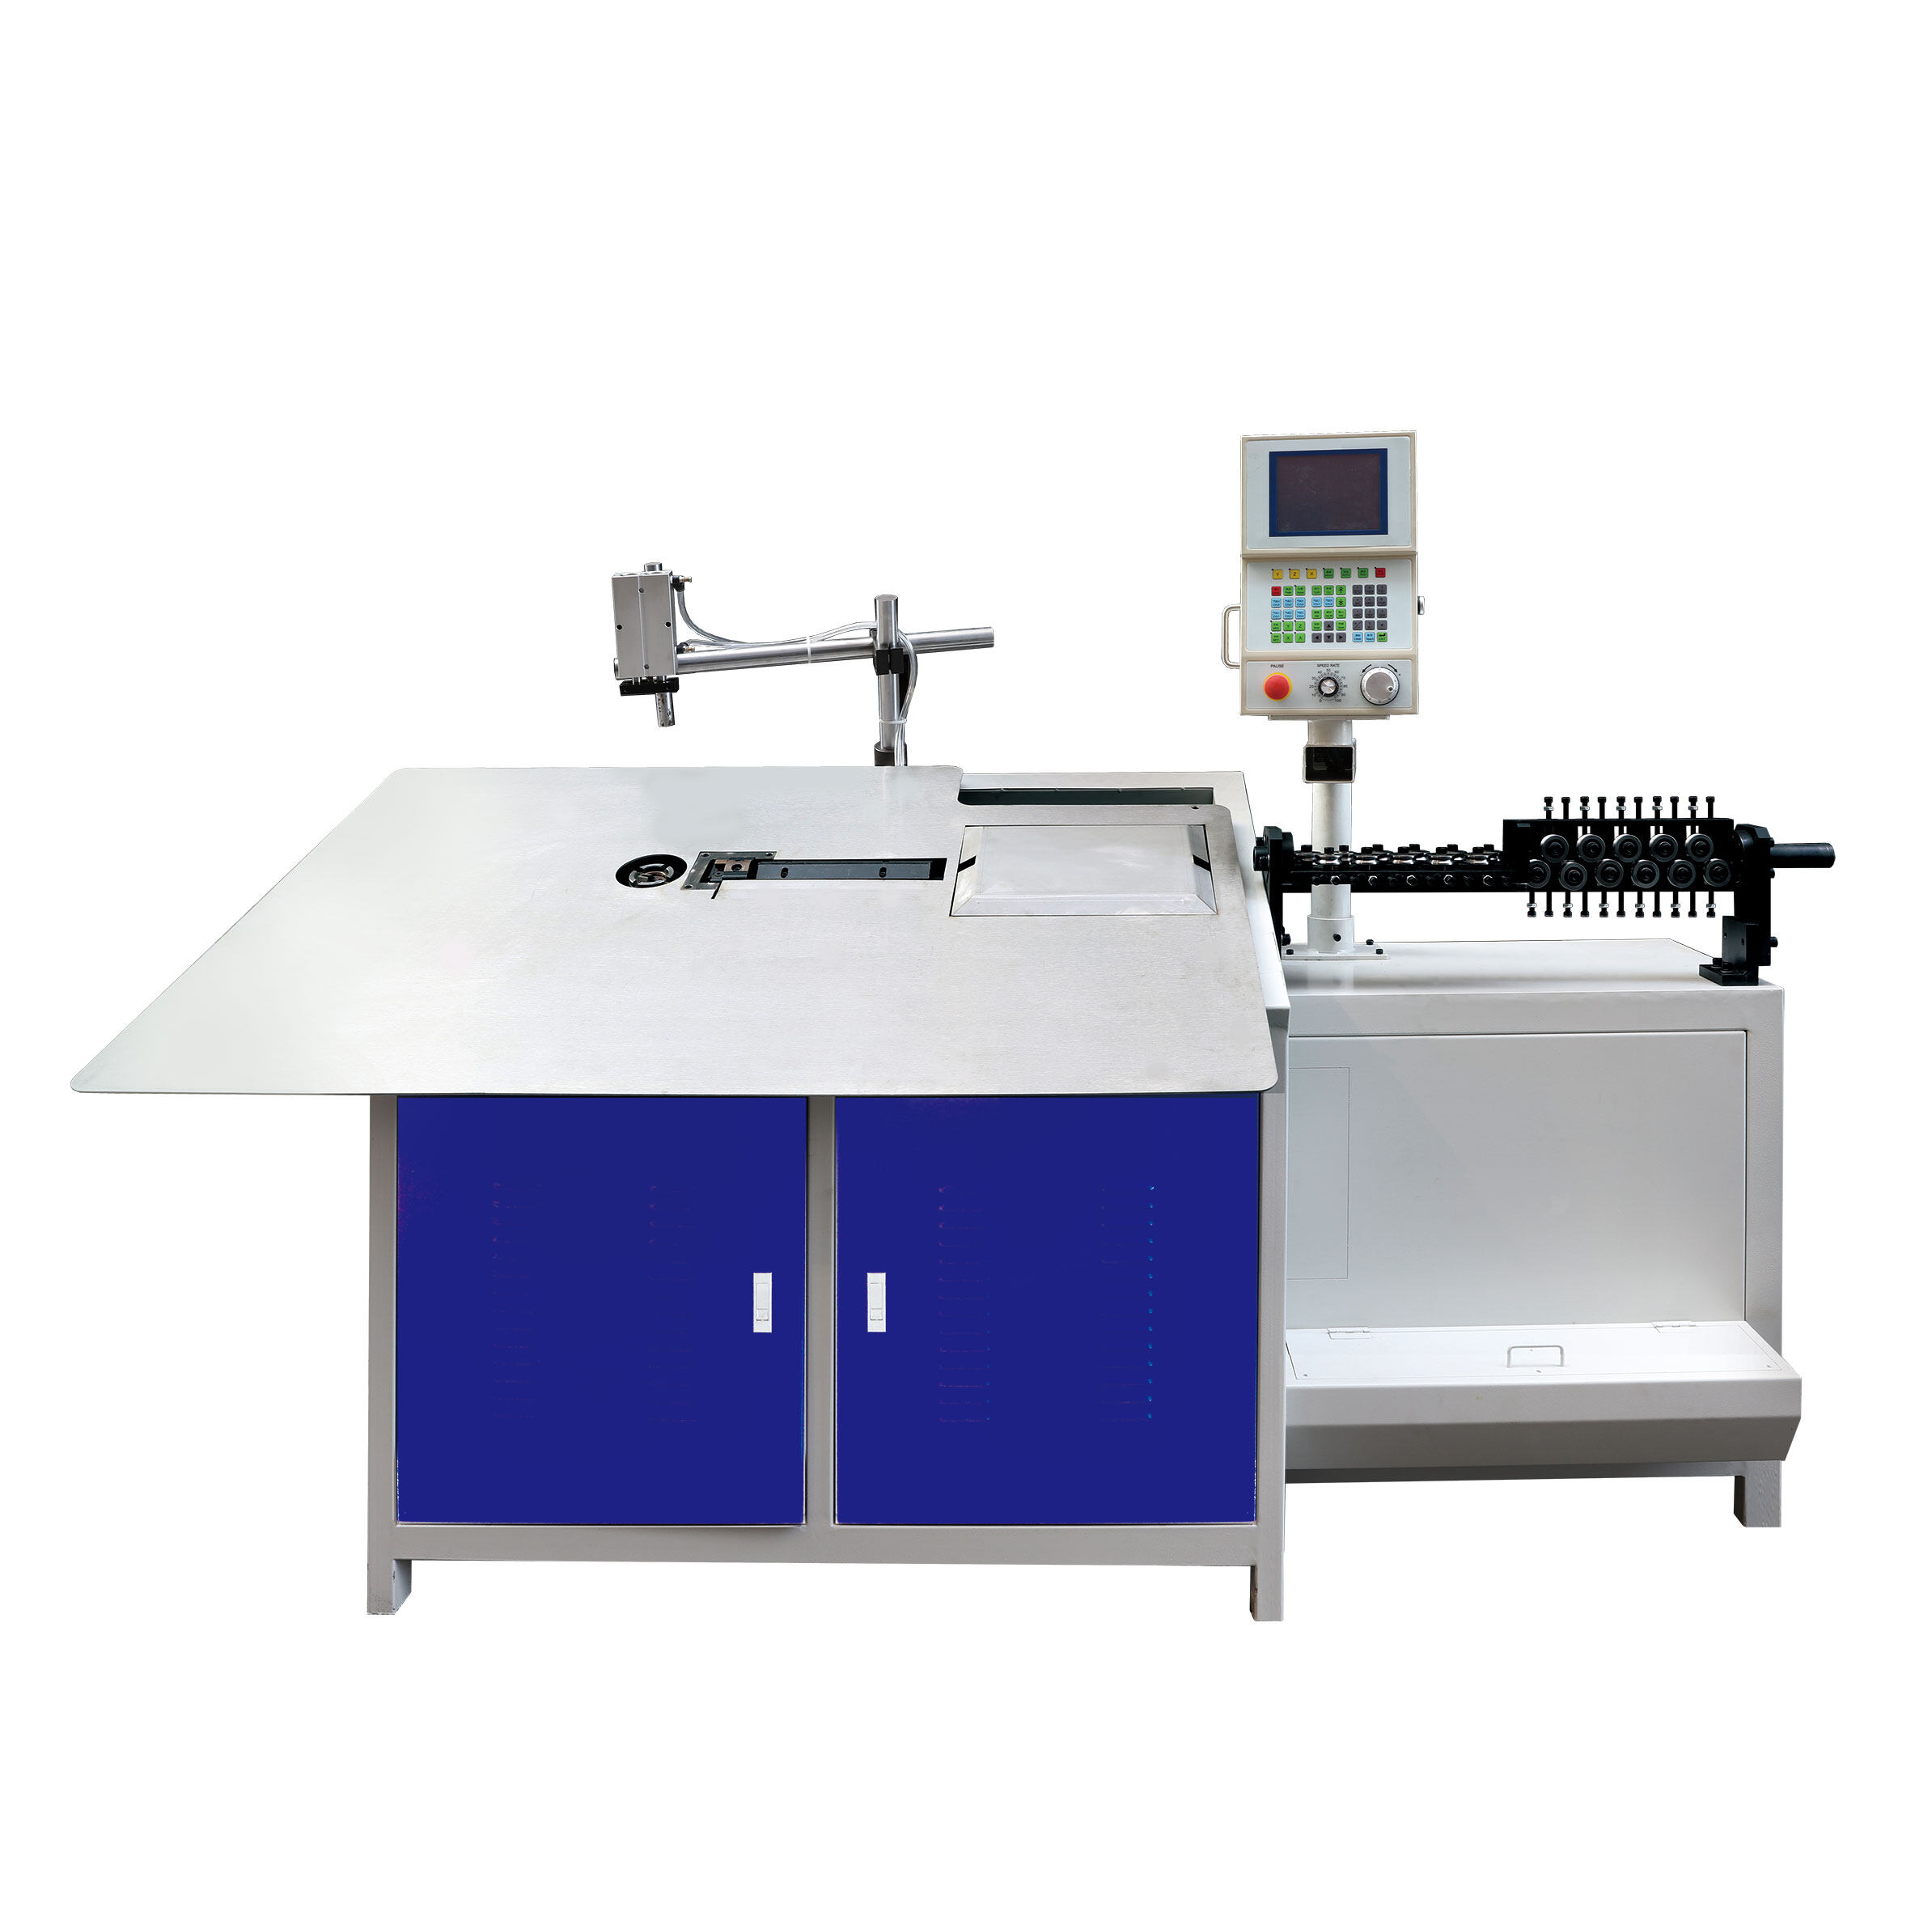 cnc wire bending machine factory, wire bending machine manufacturer, cnc wire bending machine manufacturer, wire bending machine manufacturers